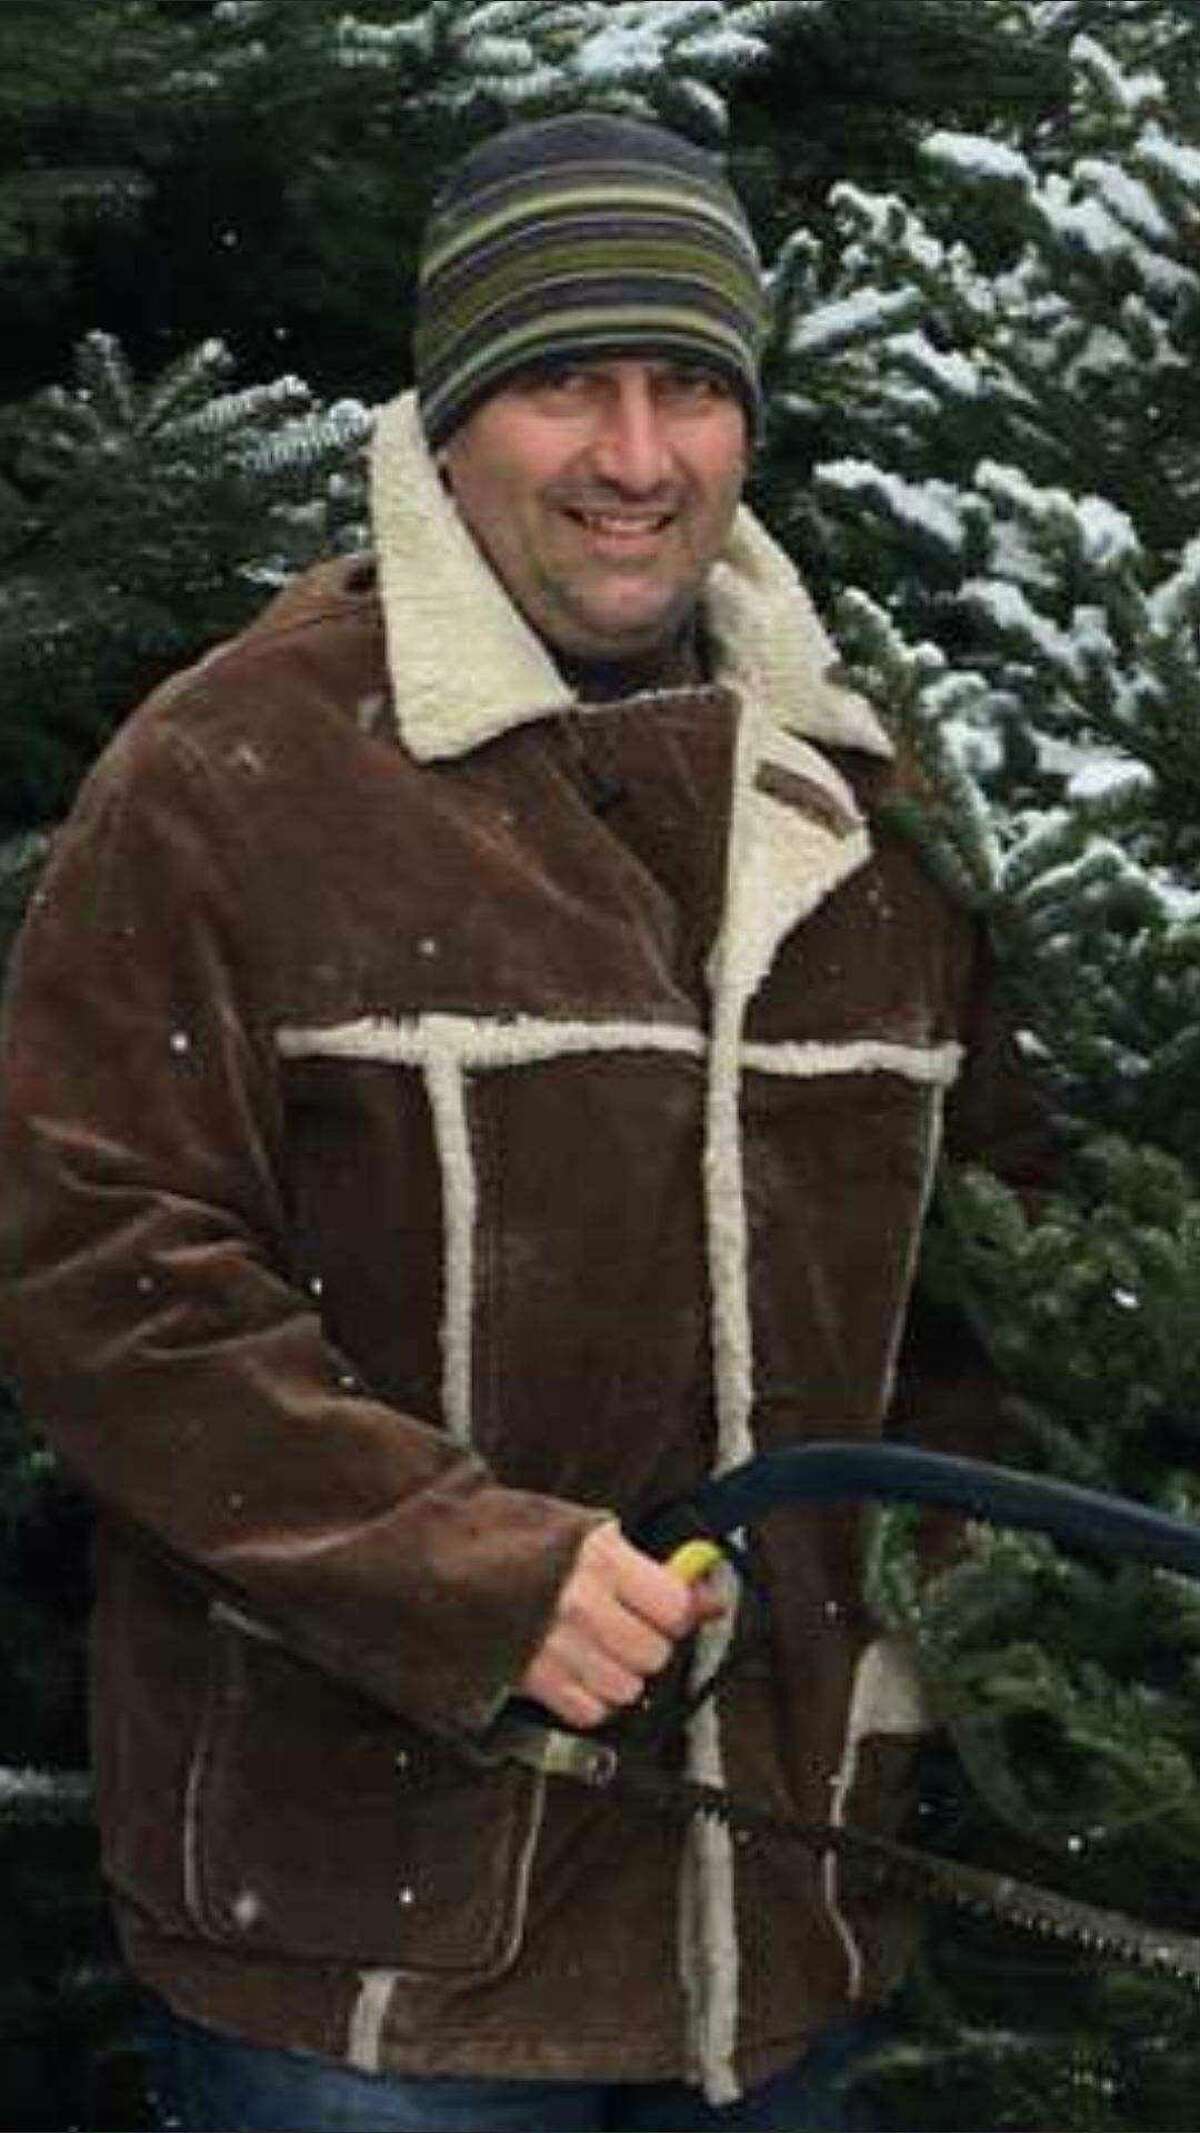 Constantinos "Danny" Filippidis, a 49-year-old firefighter from Toronto, vanished Wednesday, Feb. 7, 2018 at Whiteface Mountain where he was with friends. He was last seen by his skiing party Wednesday afternoon.